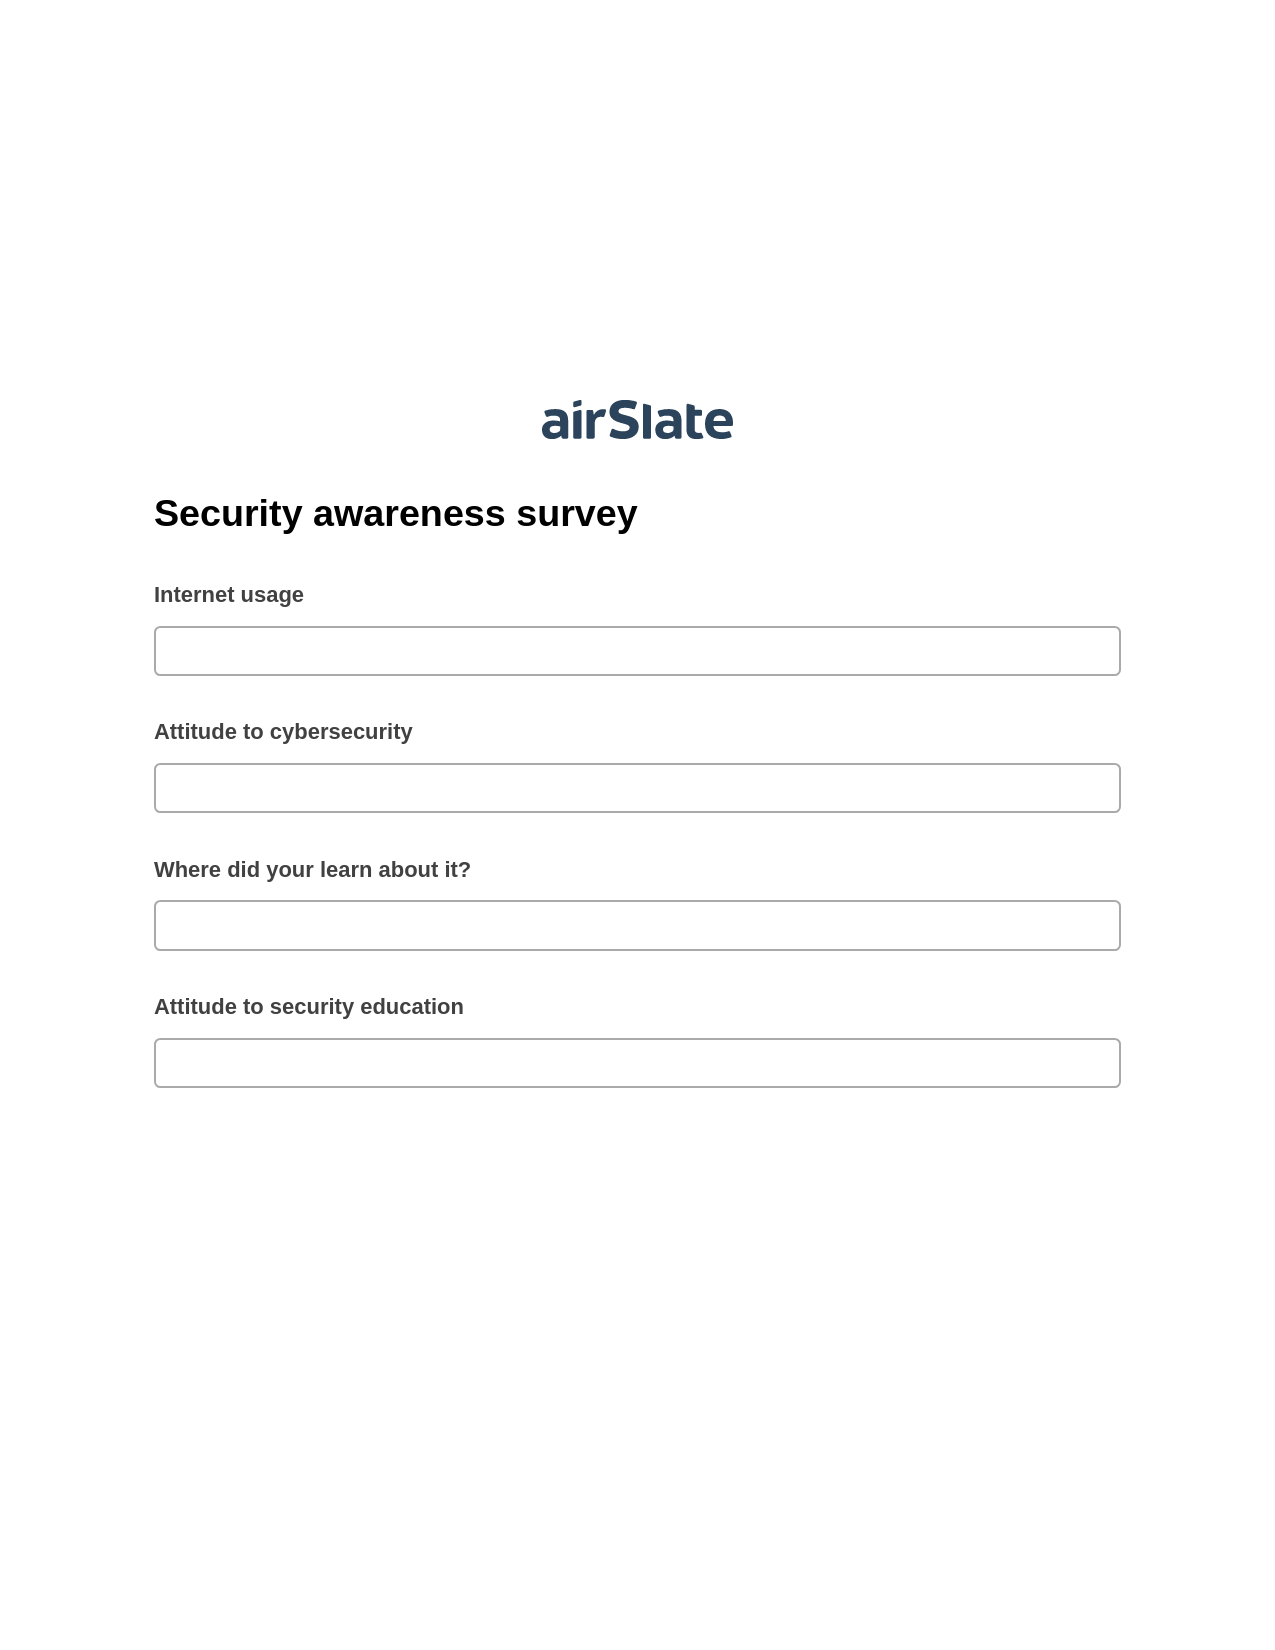 Security awareness survey Pre-fill Dropdown from Airtable, Invoke Salesforce Process Bot, Dropbox Bot